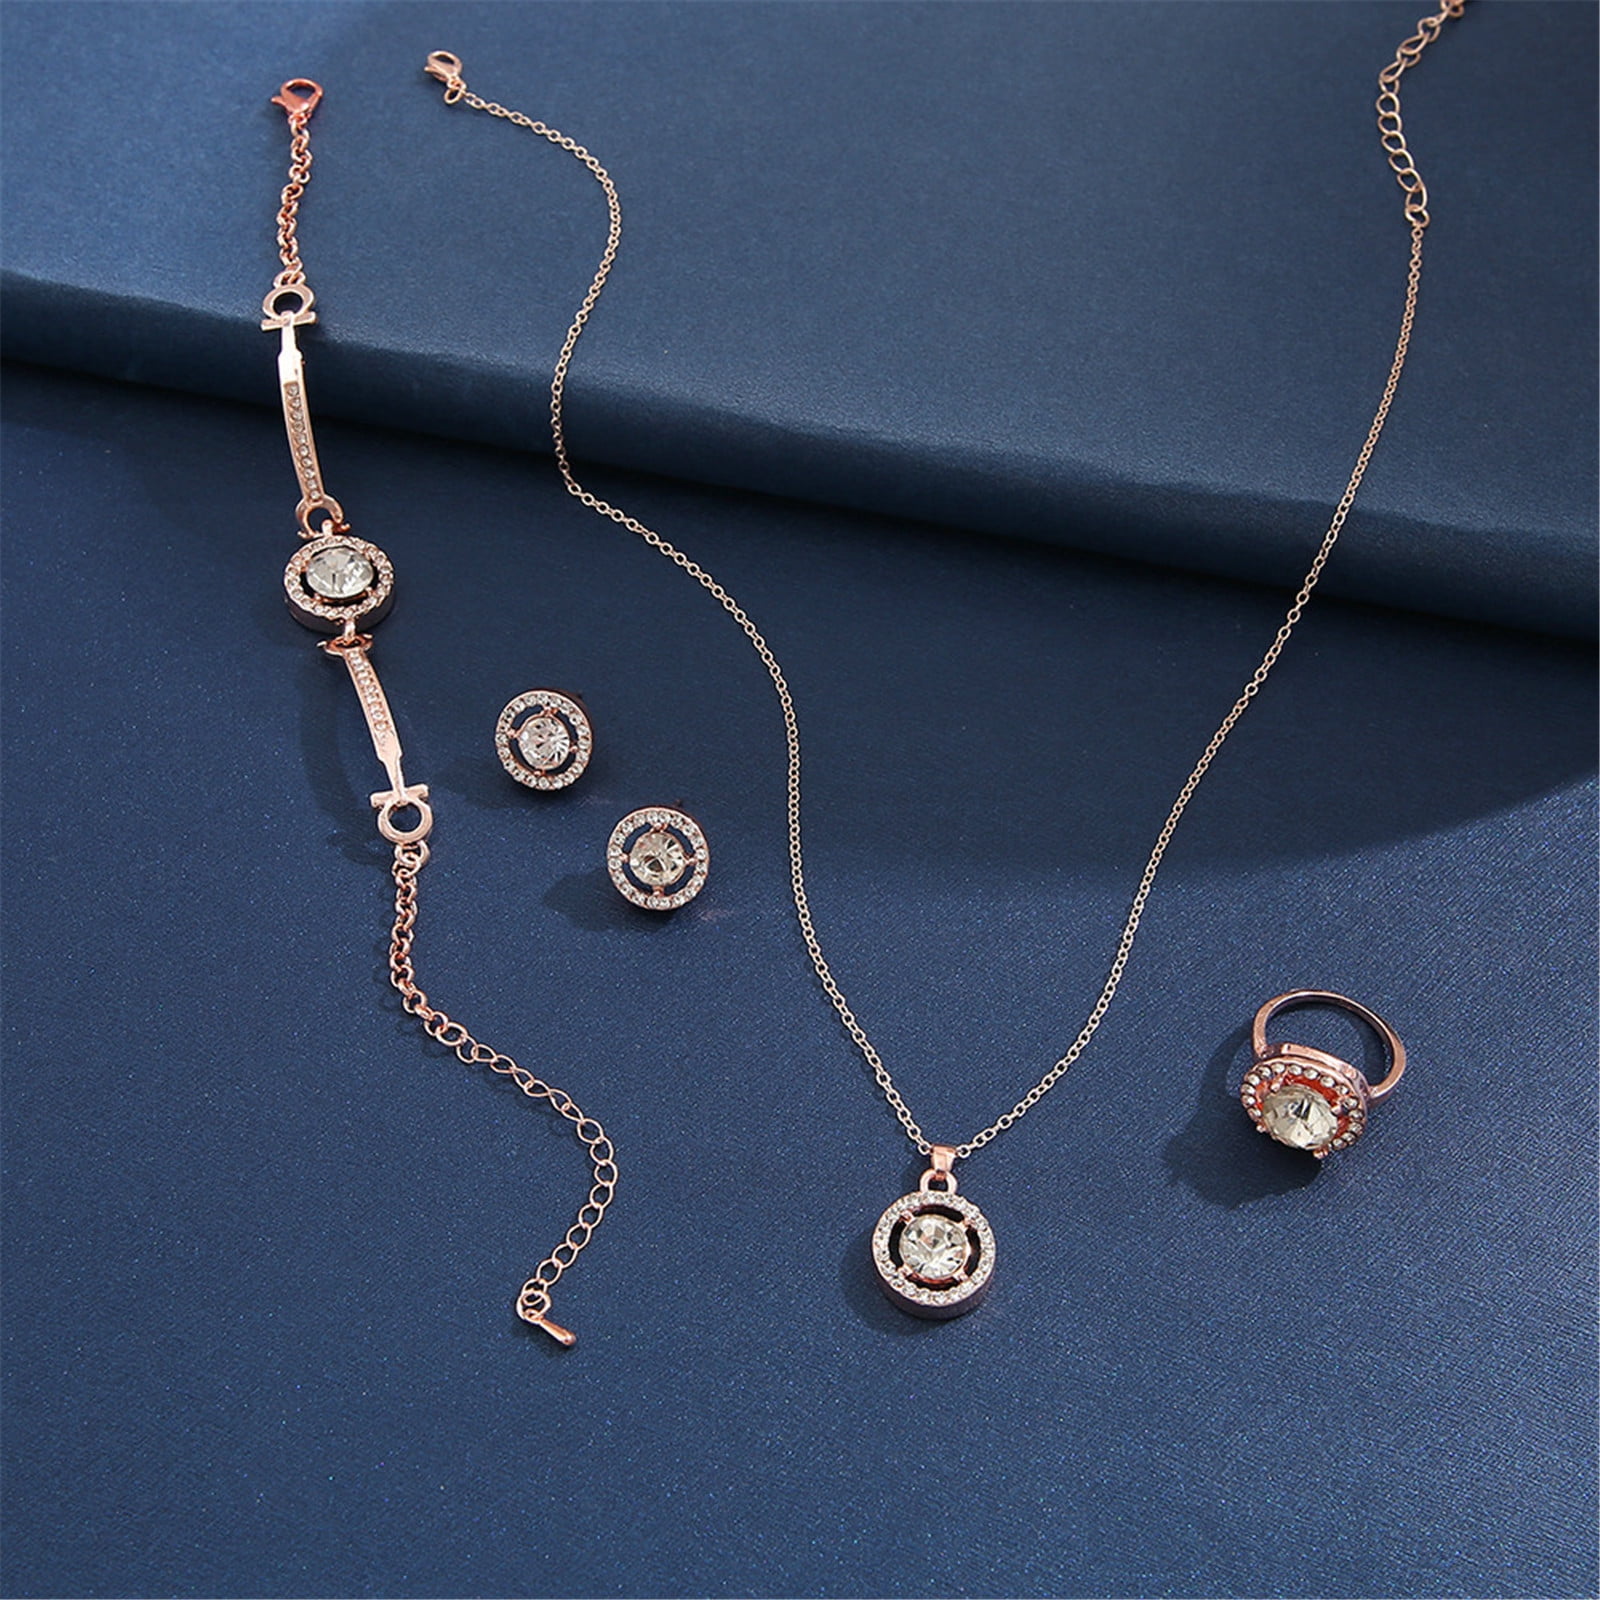 Pandora Signature Two-Tone Intertwined Circles Necklace and Earrings Set